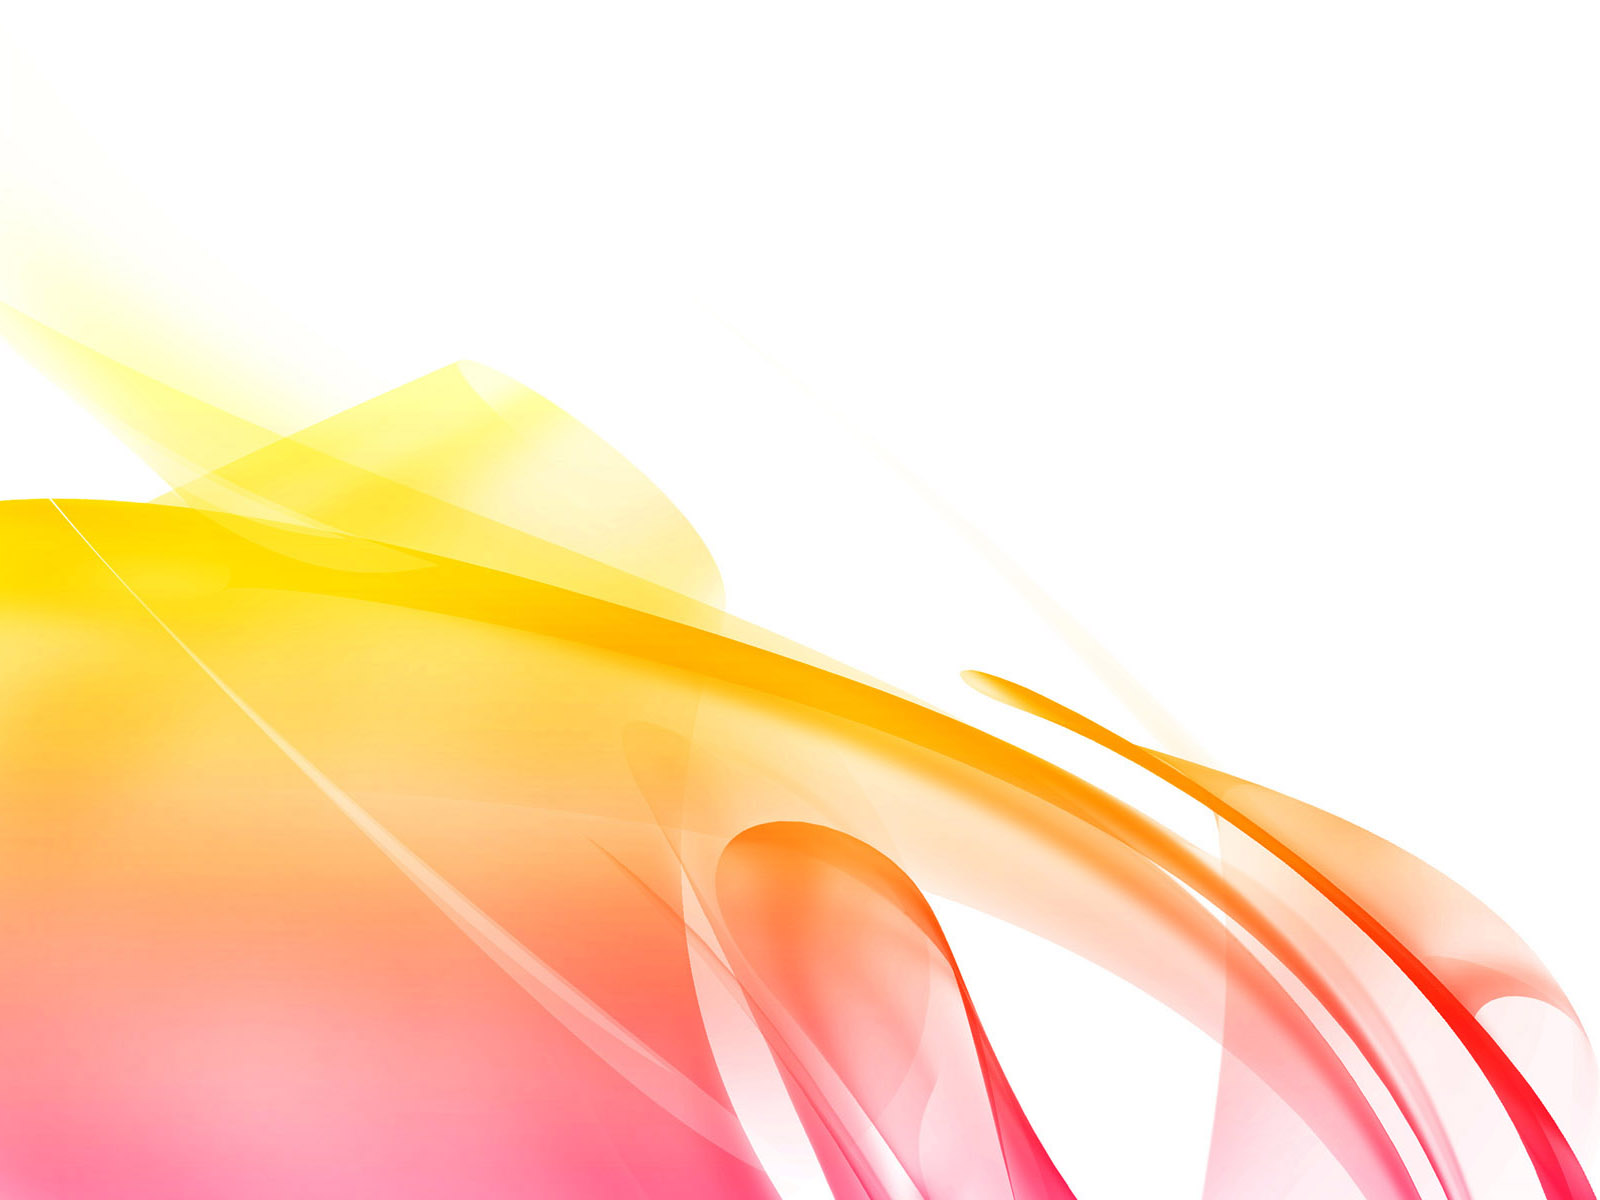 Colourback Orange Abstract Backgrounds | Abstract, Orange, Red, White,  Yellow Templates | Free PPT Grounds